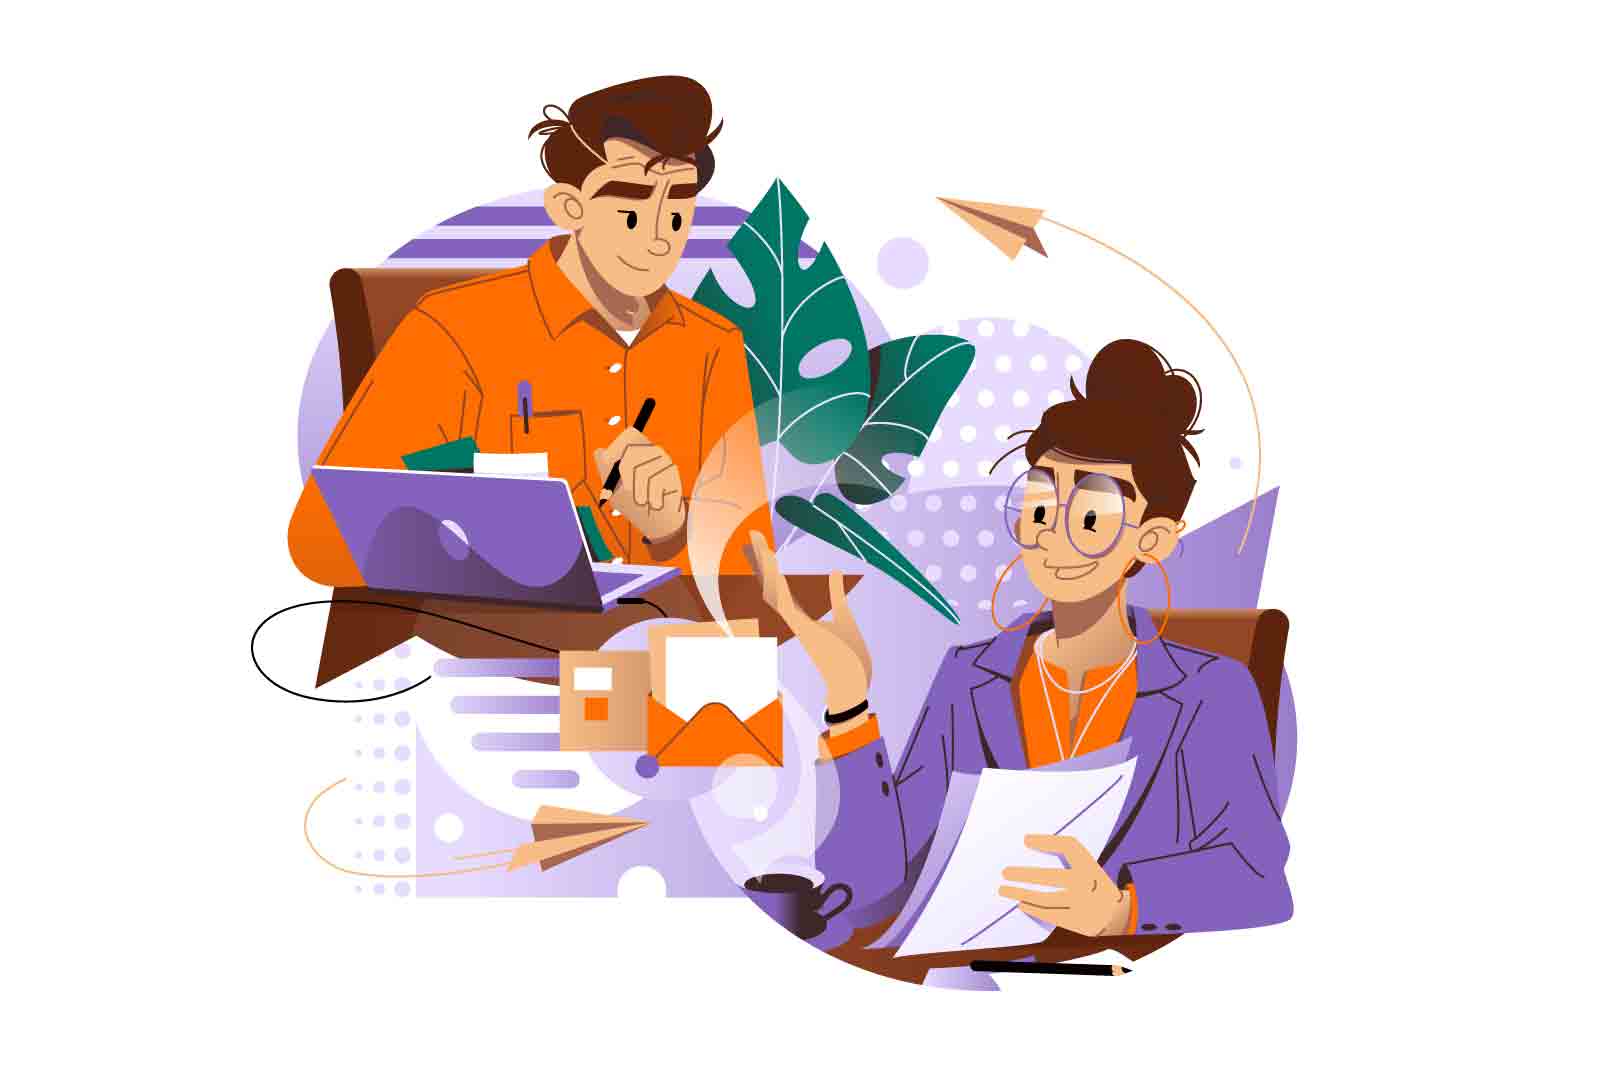 Two colleagues deep in conversation, discussing a project or brainstorming ideas. vector illustration. teamwork concept.